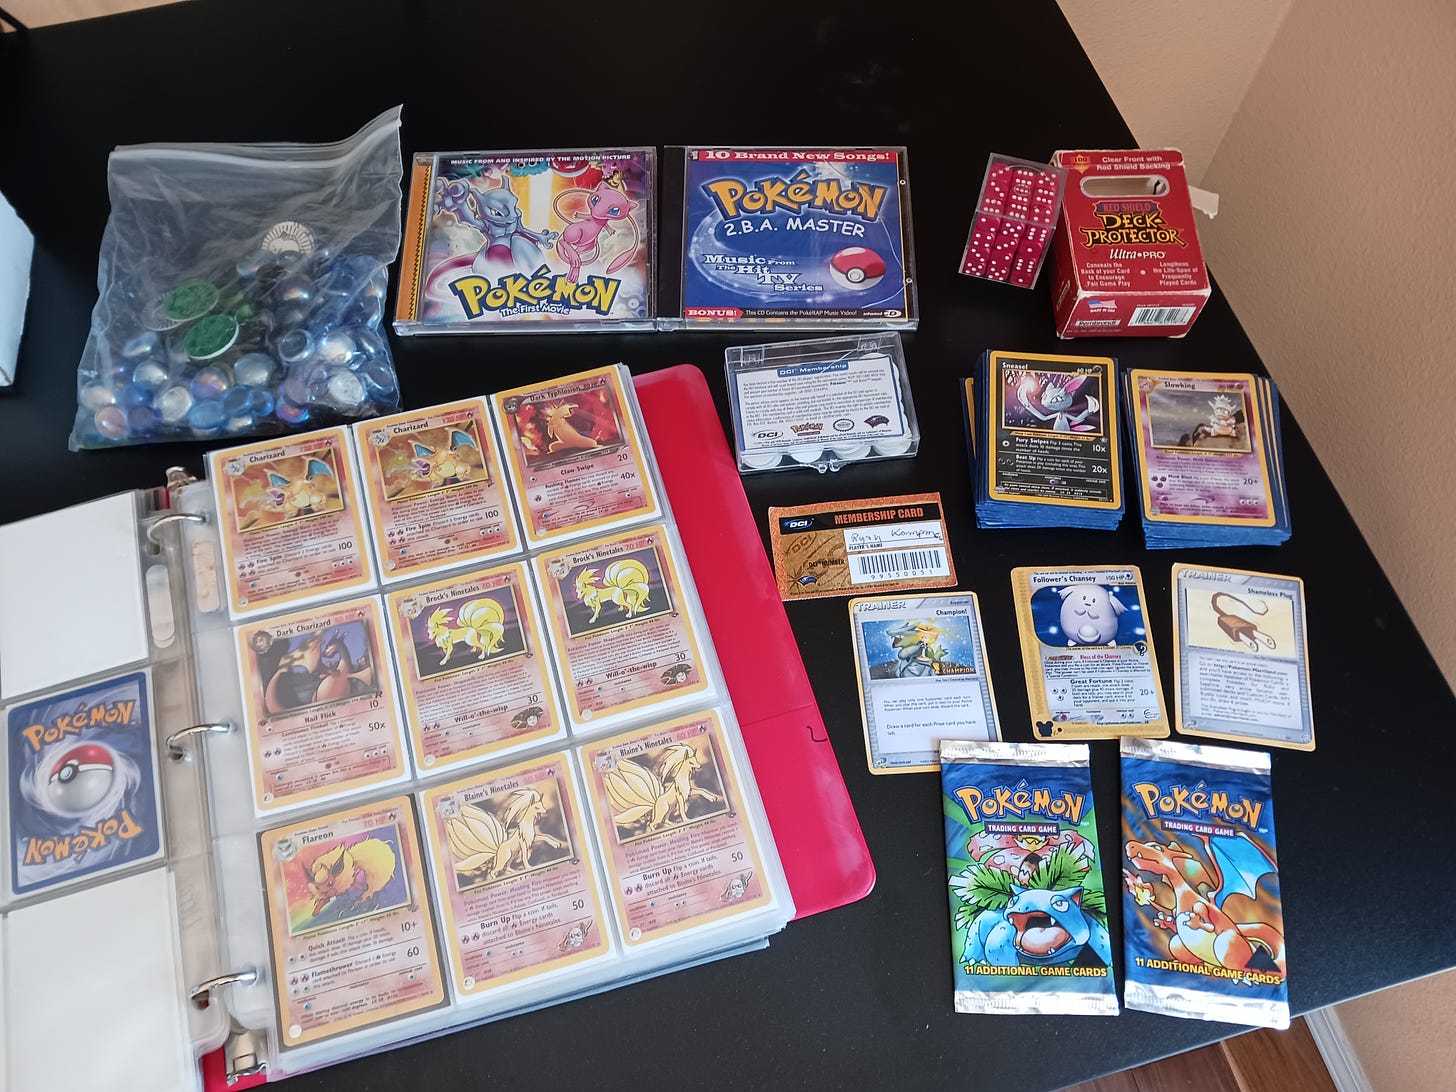 More items from Ryan’s collection, including a WotC ID card, misprinted TCG Base set booster packs, music albums, TCG counters and coins, and fake cards